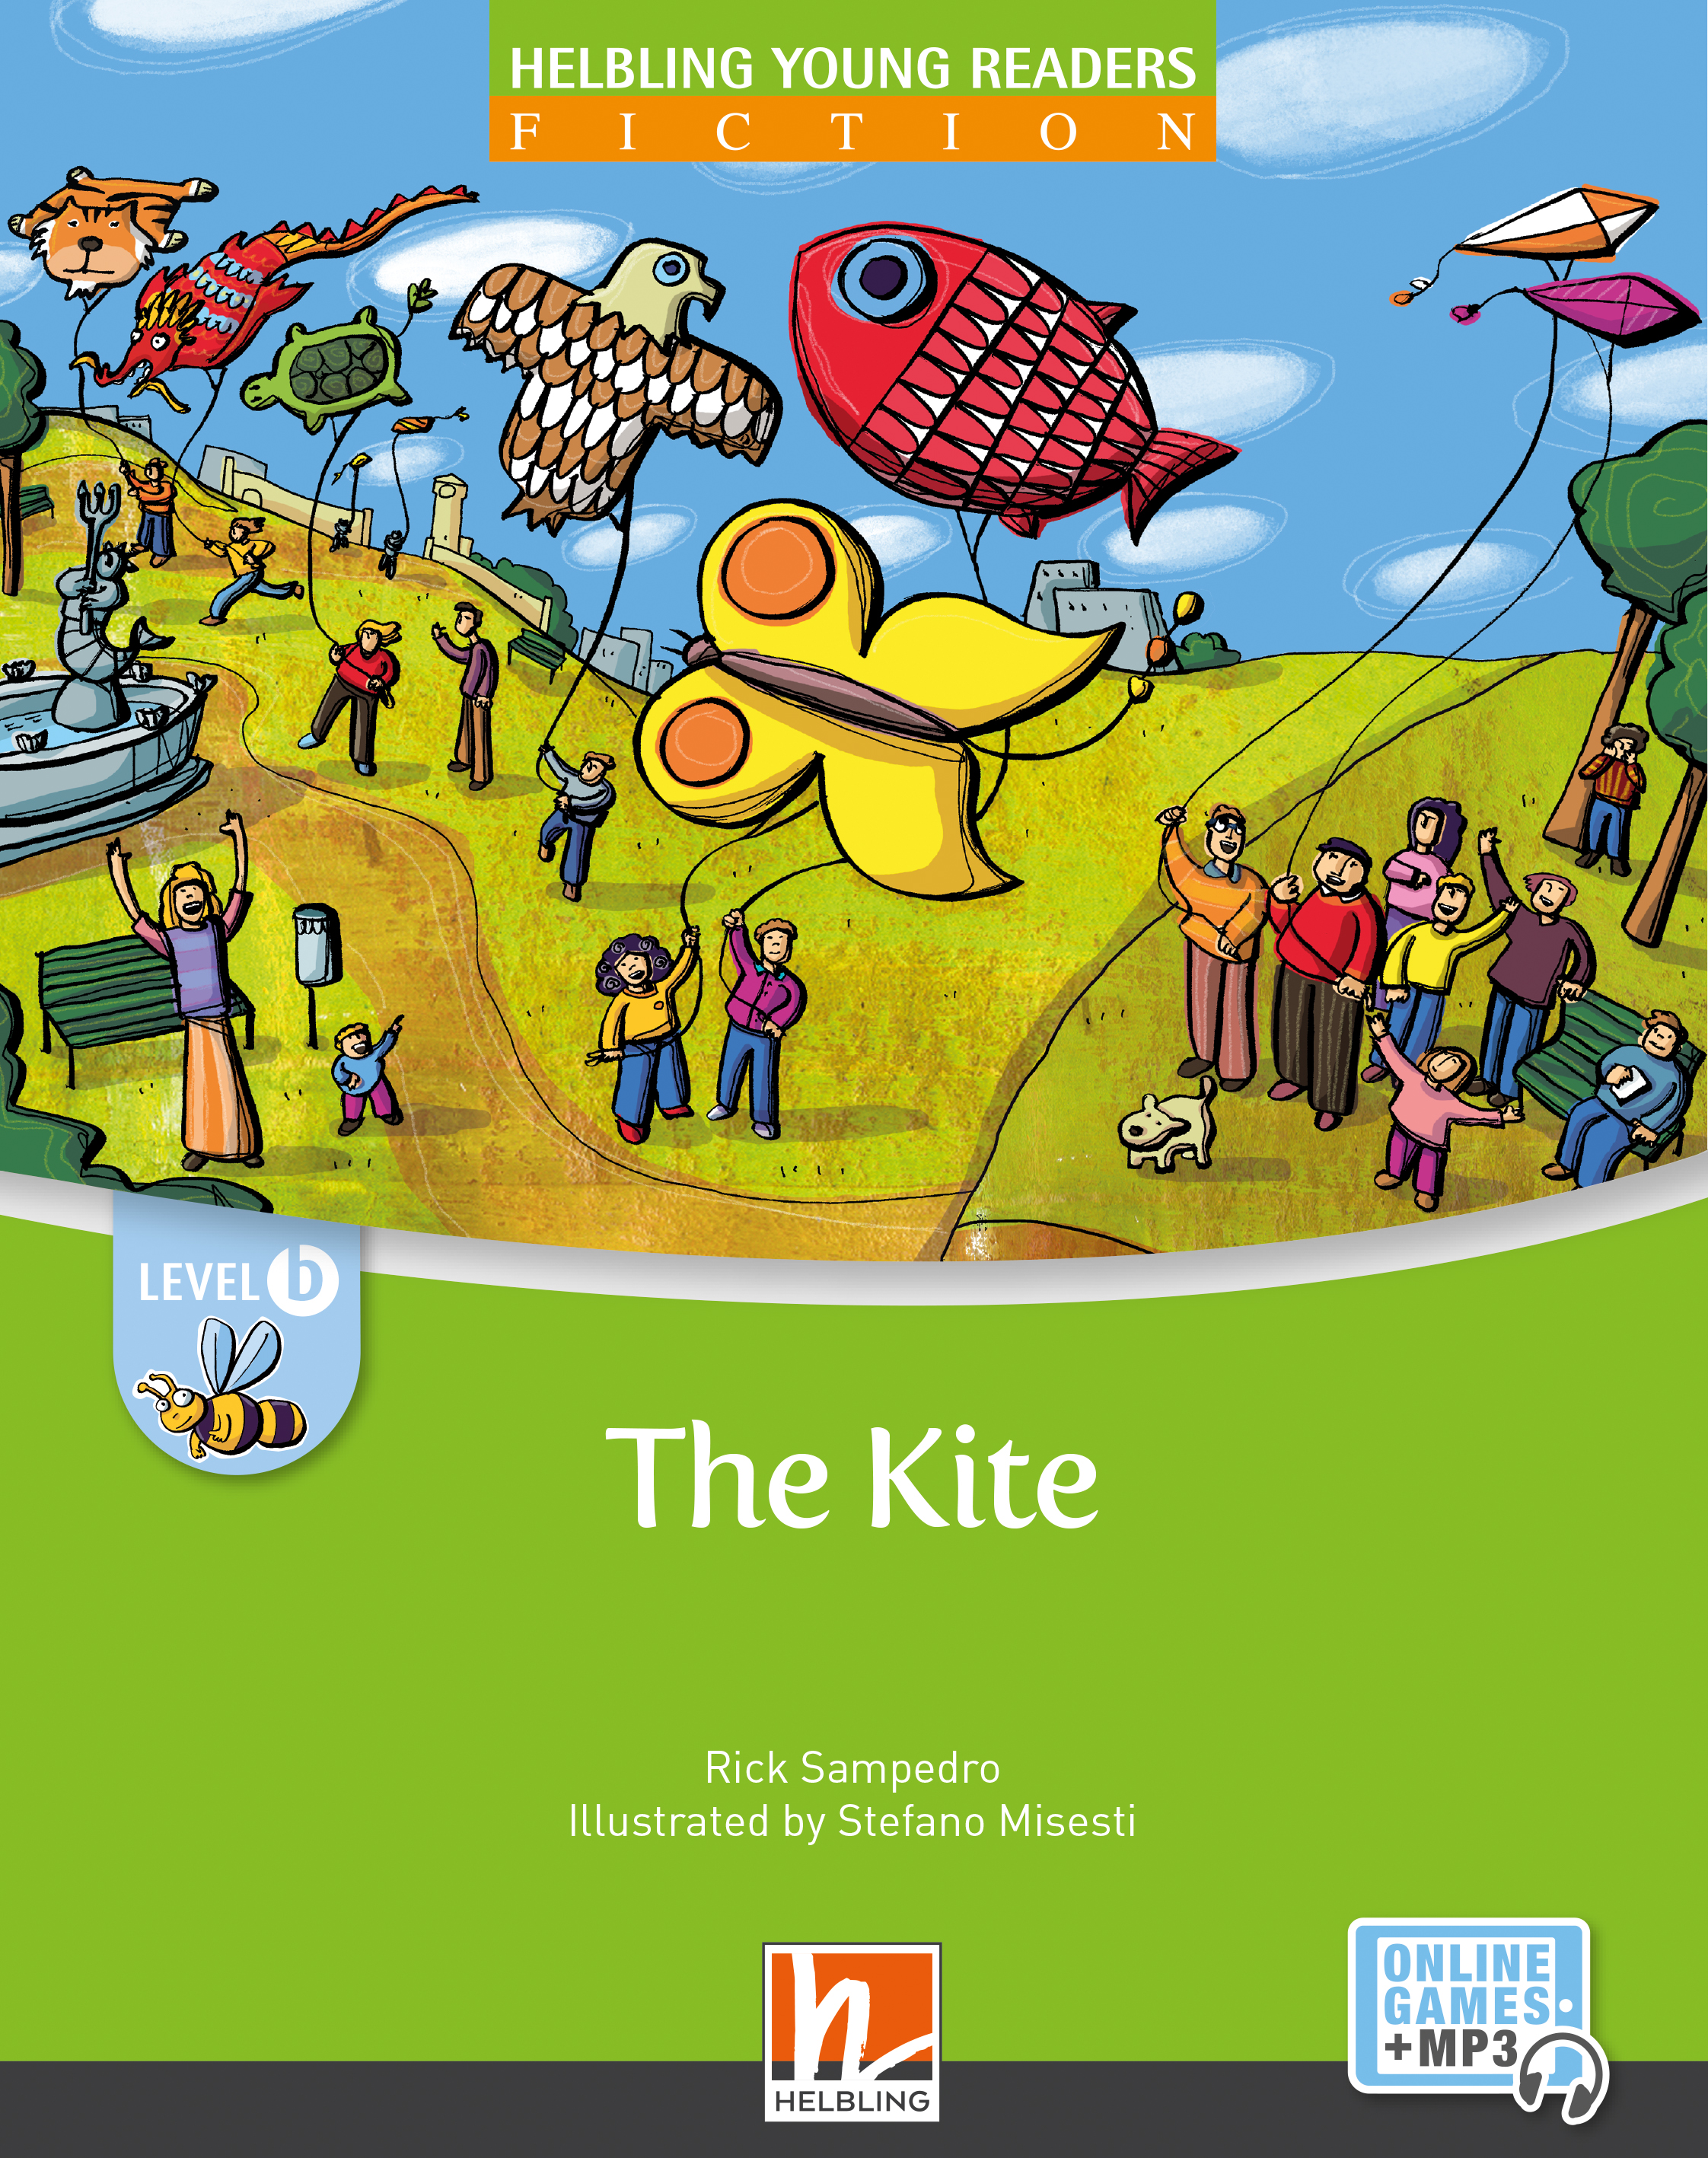 The Kite (New Edition), level B